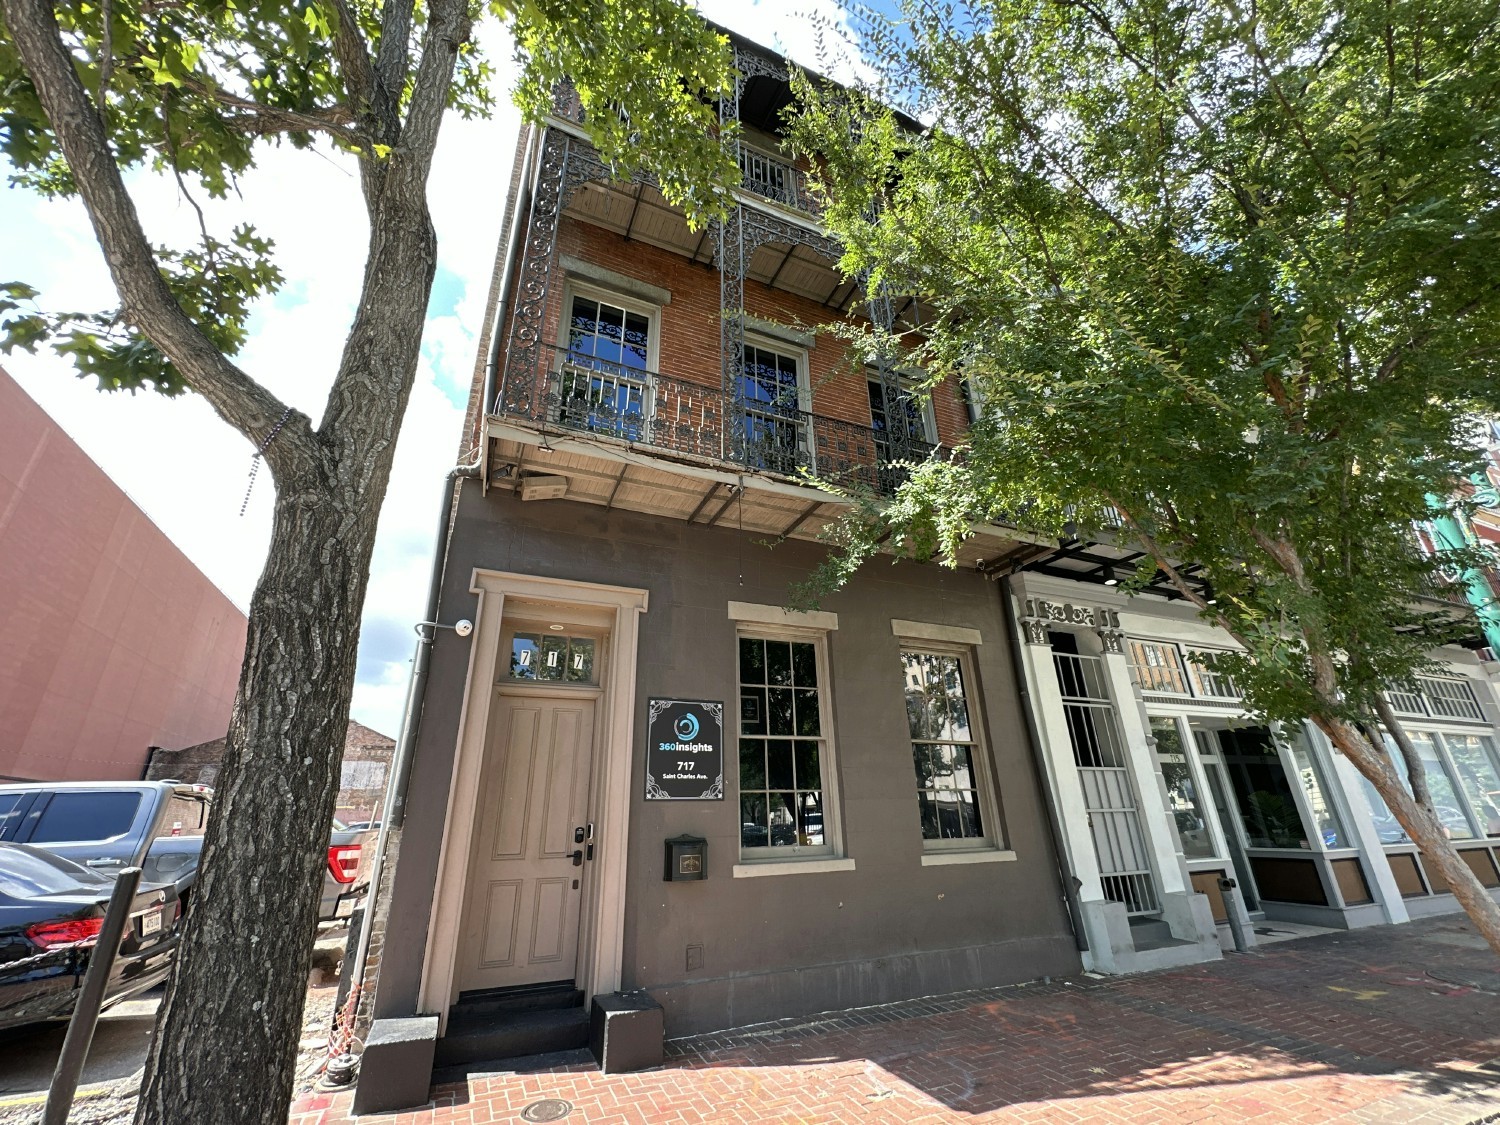 Our exciting new office & US headquarters located in New Orleans!